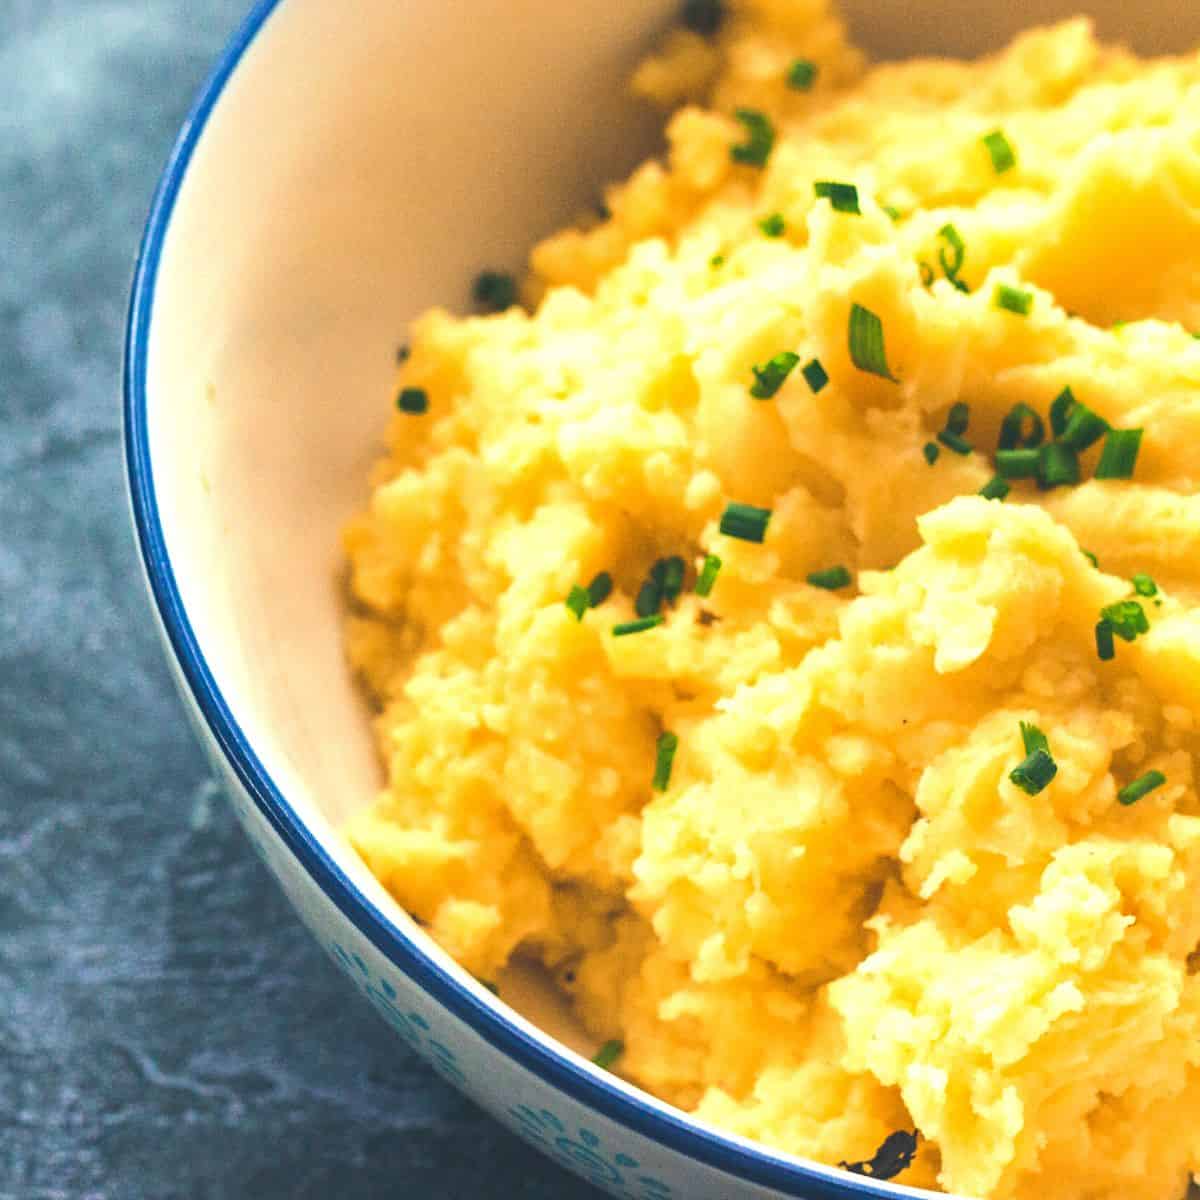 Mashed Potato sprinkled with chives